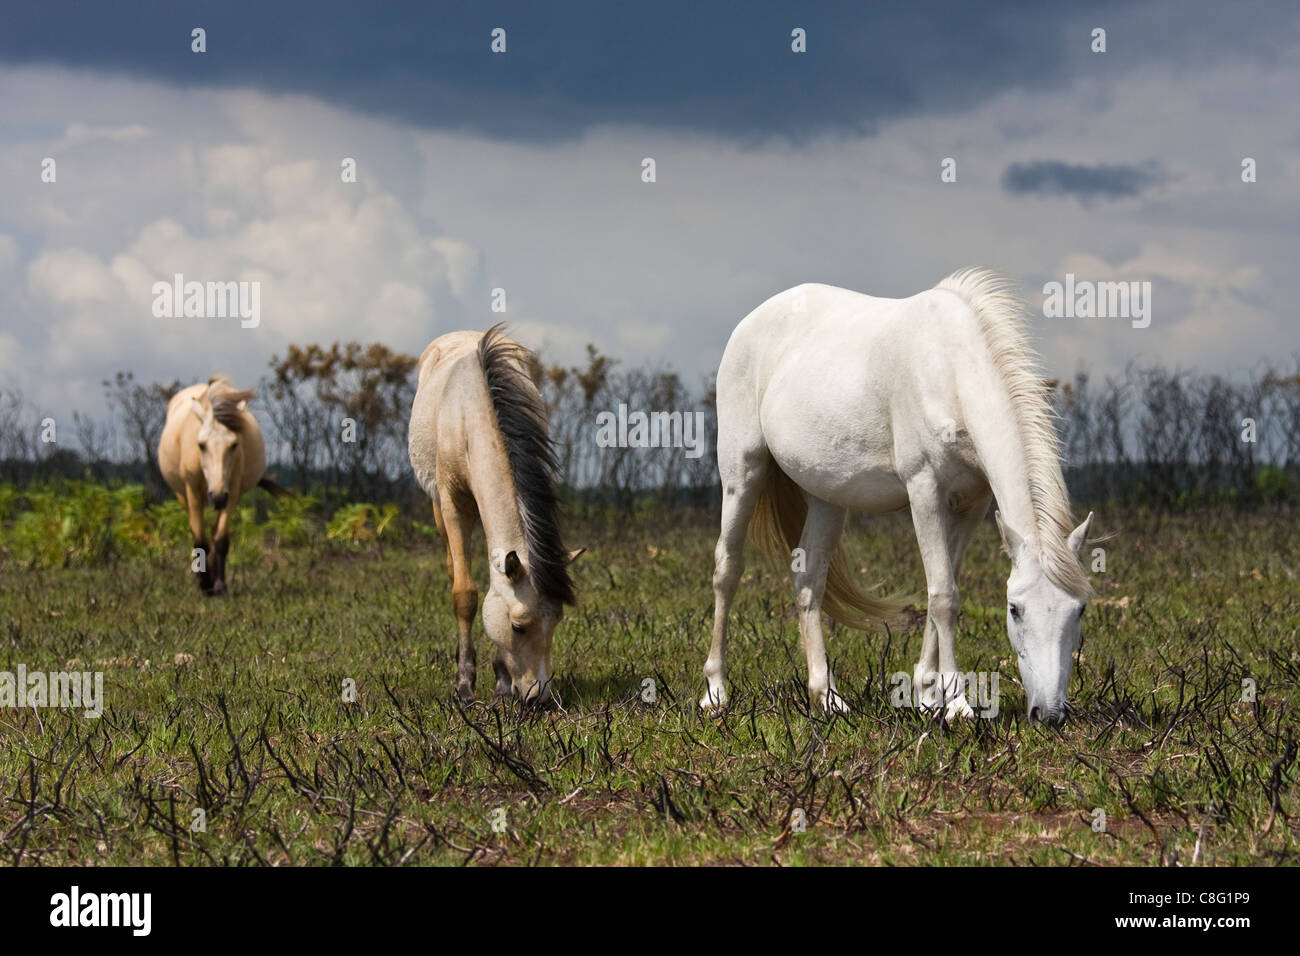 Three ponies grazing on the plains of the New Forest National Park. Dark clouds suggest an approaching storm. Stock Photo